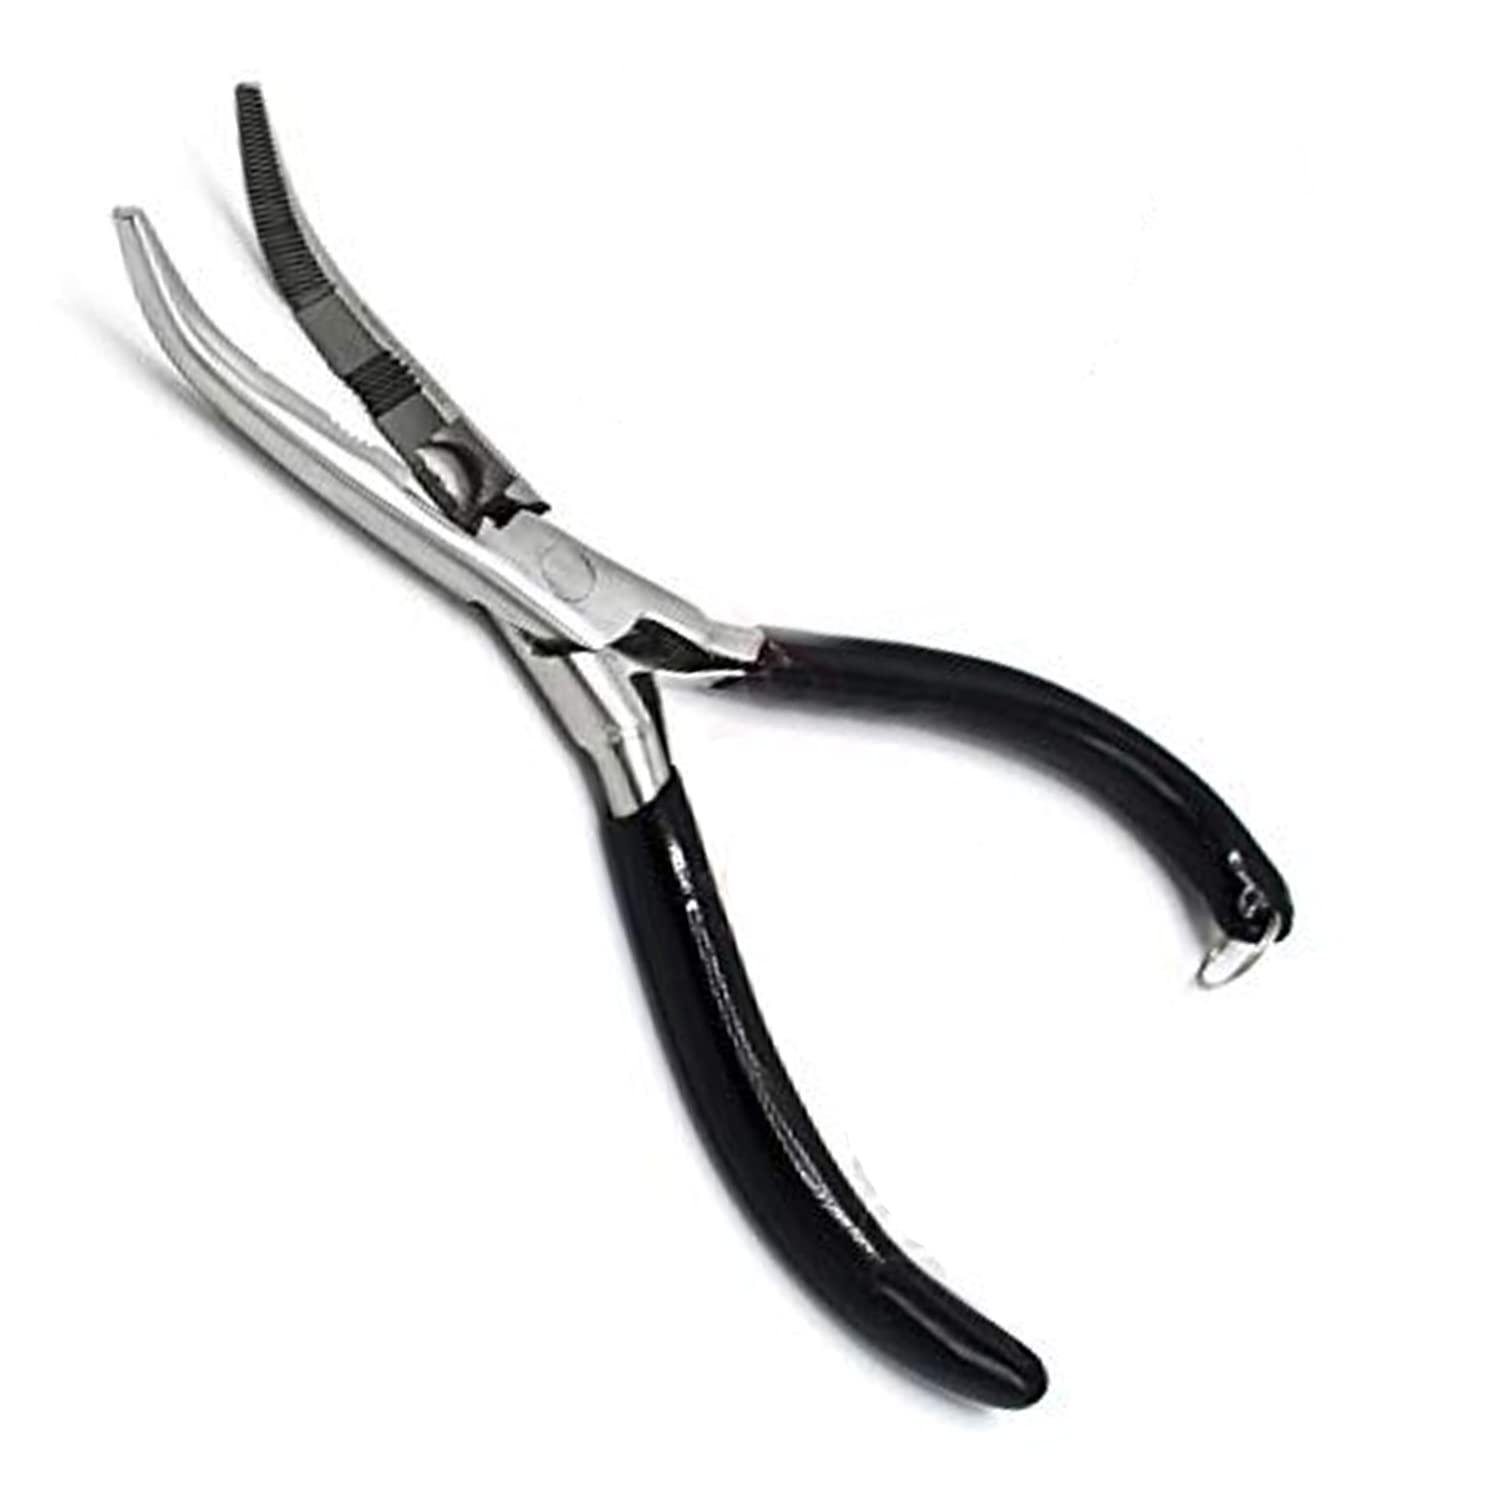 precise canada: 1 pcs fisherman's fishing pliers 7" stainless steel